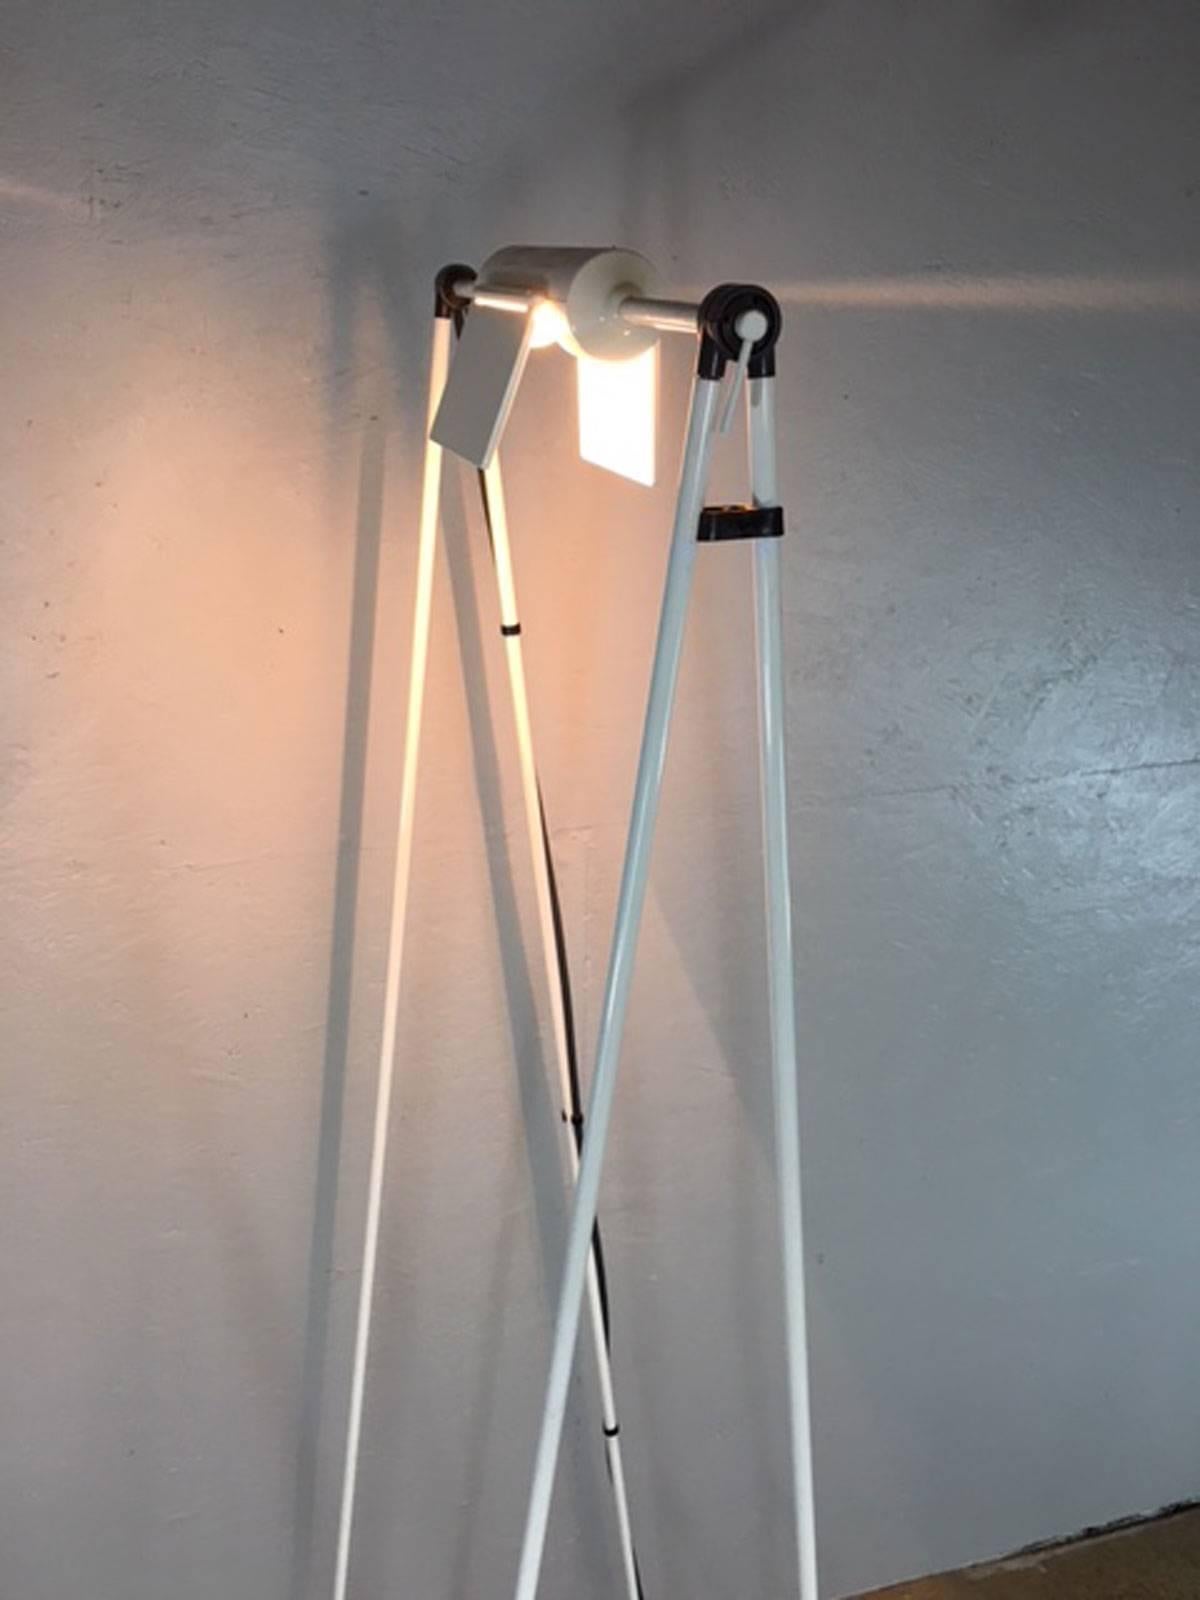 Unique Mid-Century Modern A-frame floor lamp with slider dimmer floor tap switch.